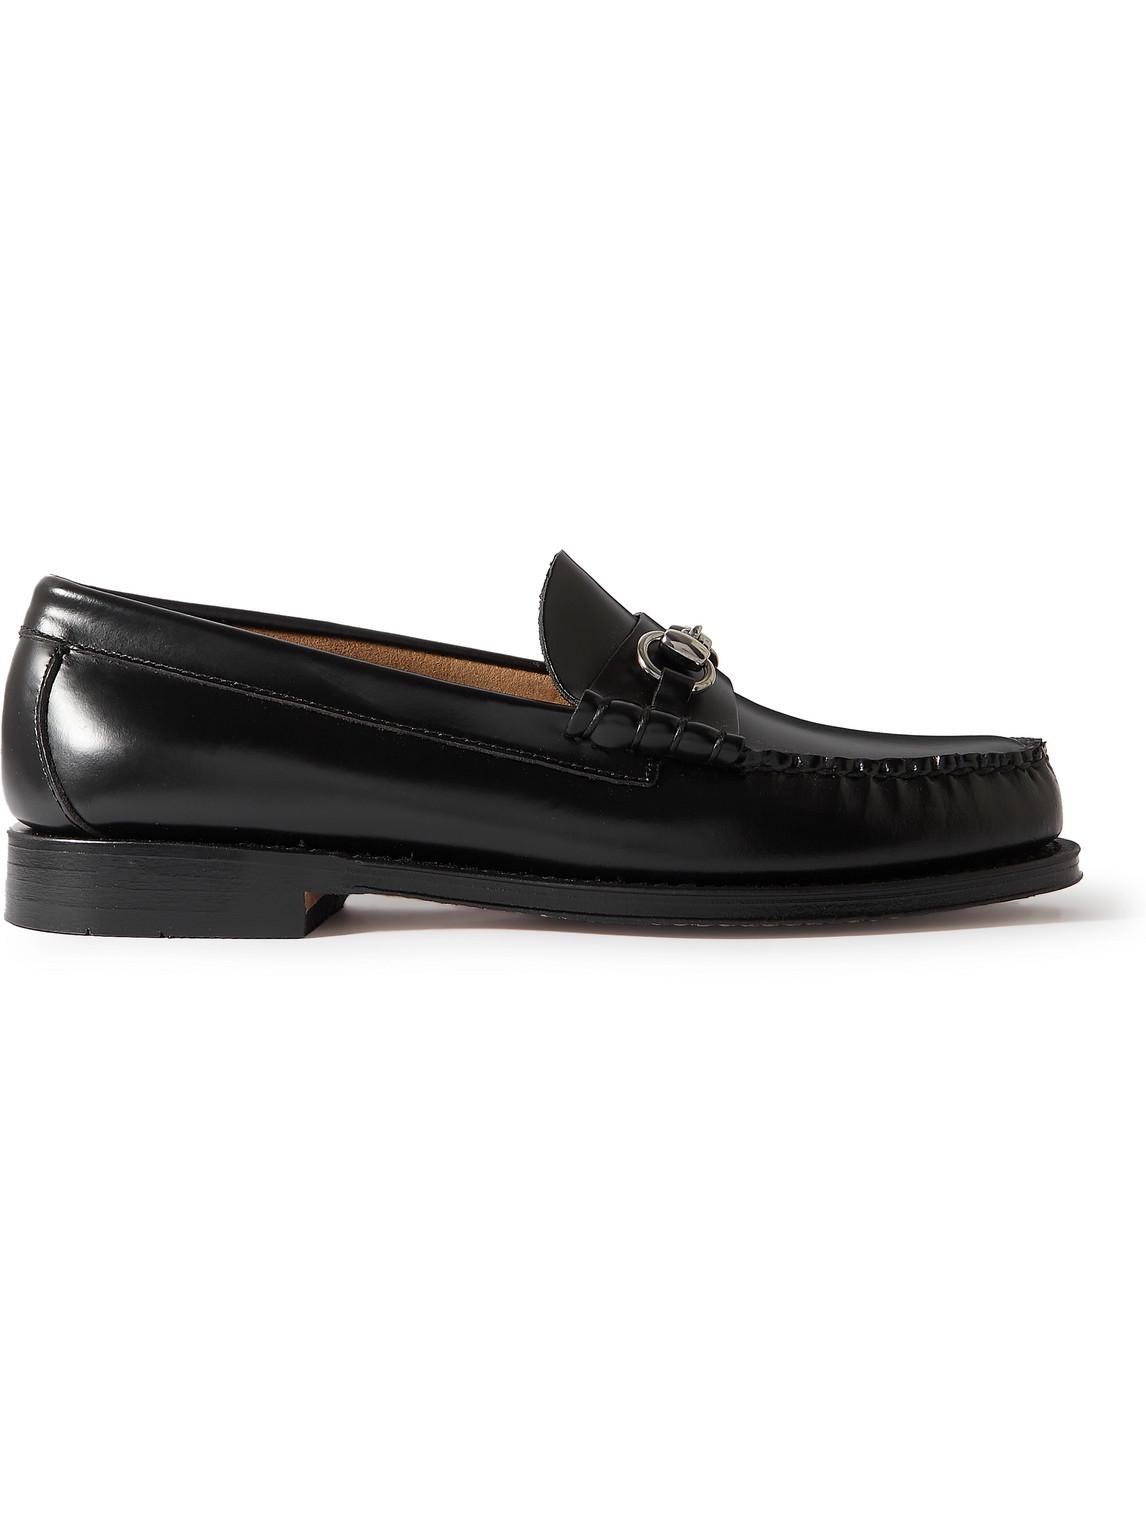 G.H. Bass & Co. Weejuns Heritage Lincoln Horsebit Leather Penny Loafers ...